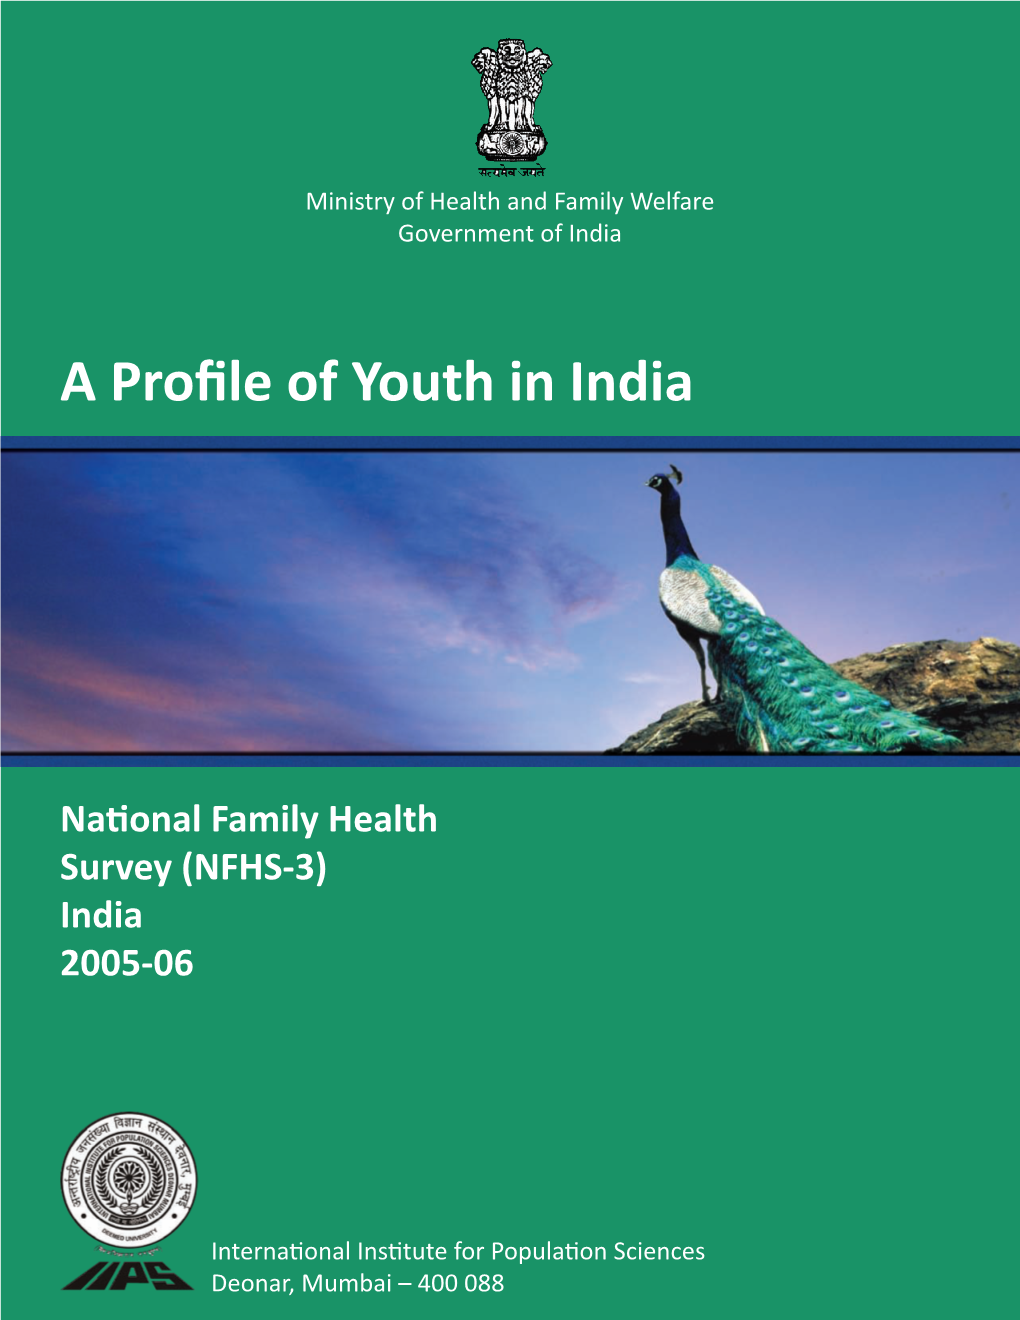 A Profile of Youth in India